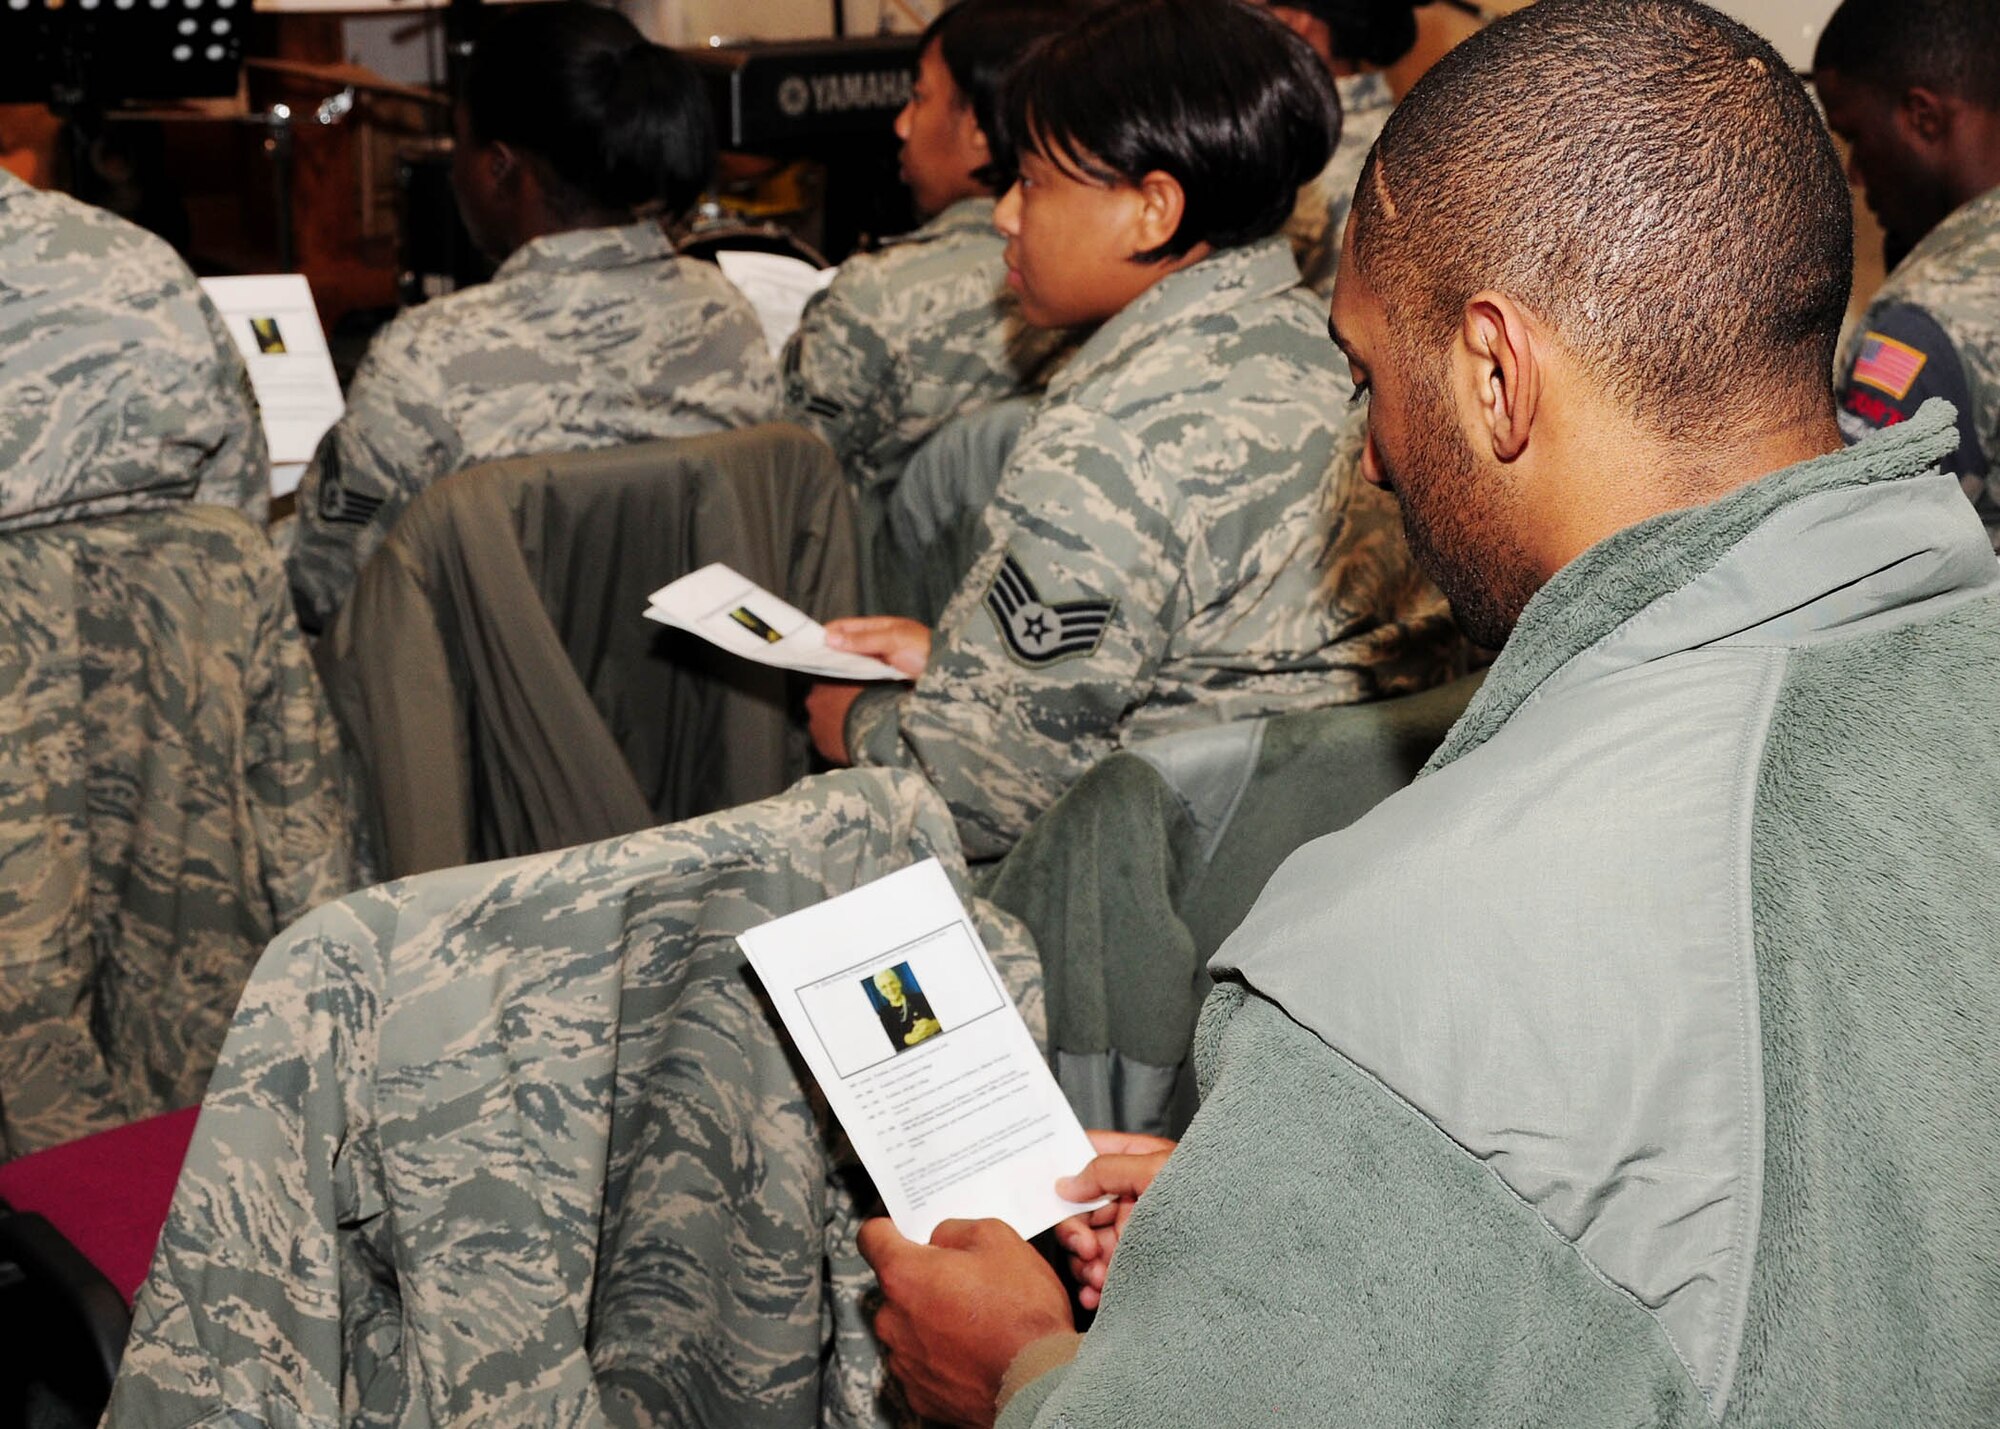 Senior Airman Armand Boddie, 376th Logistics Readiness Squadron, reviews the biography of the guest speaker during the Martin Luther King, Jr. remembrance ceremony at the Transit Center at Manas, Kyrgyzstan, Jan. 18, 2009 (U.S Air Force photo/Senior Airman Nichelle Anderson/released)